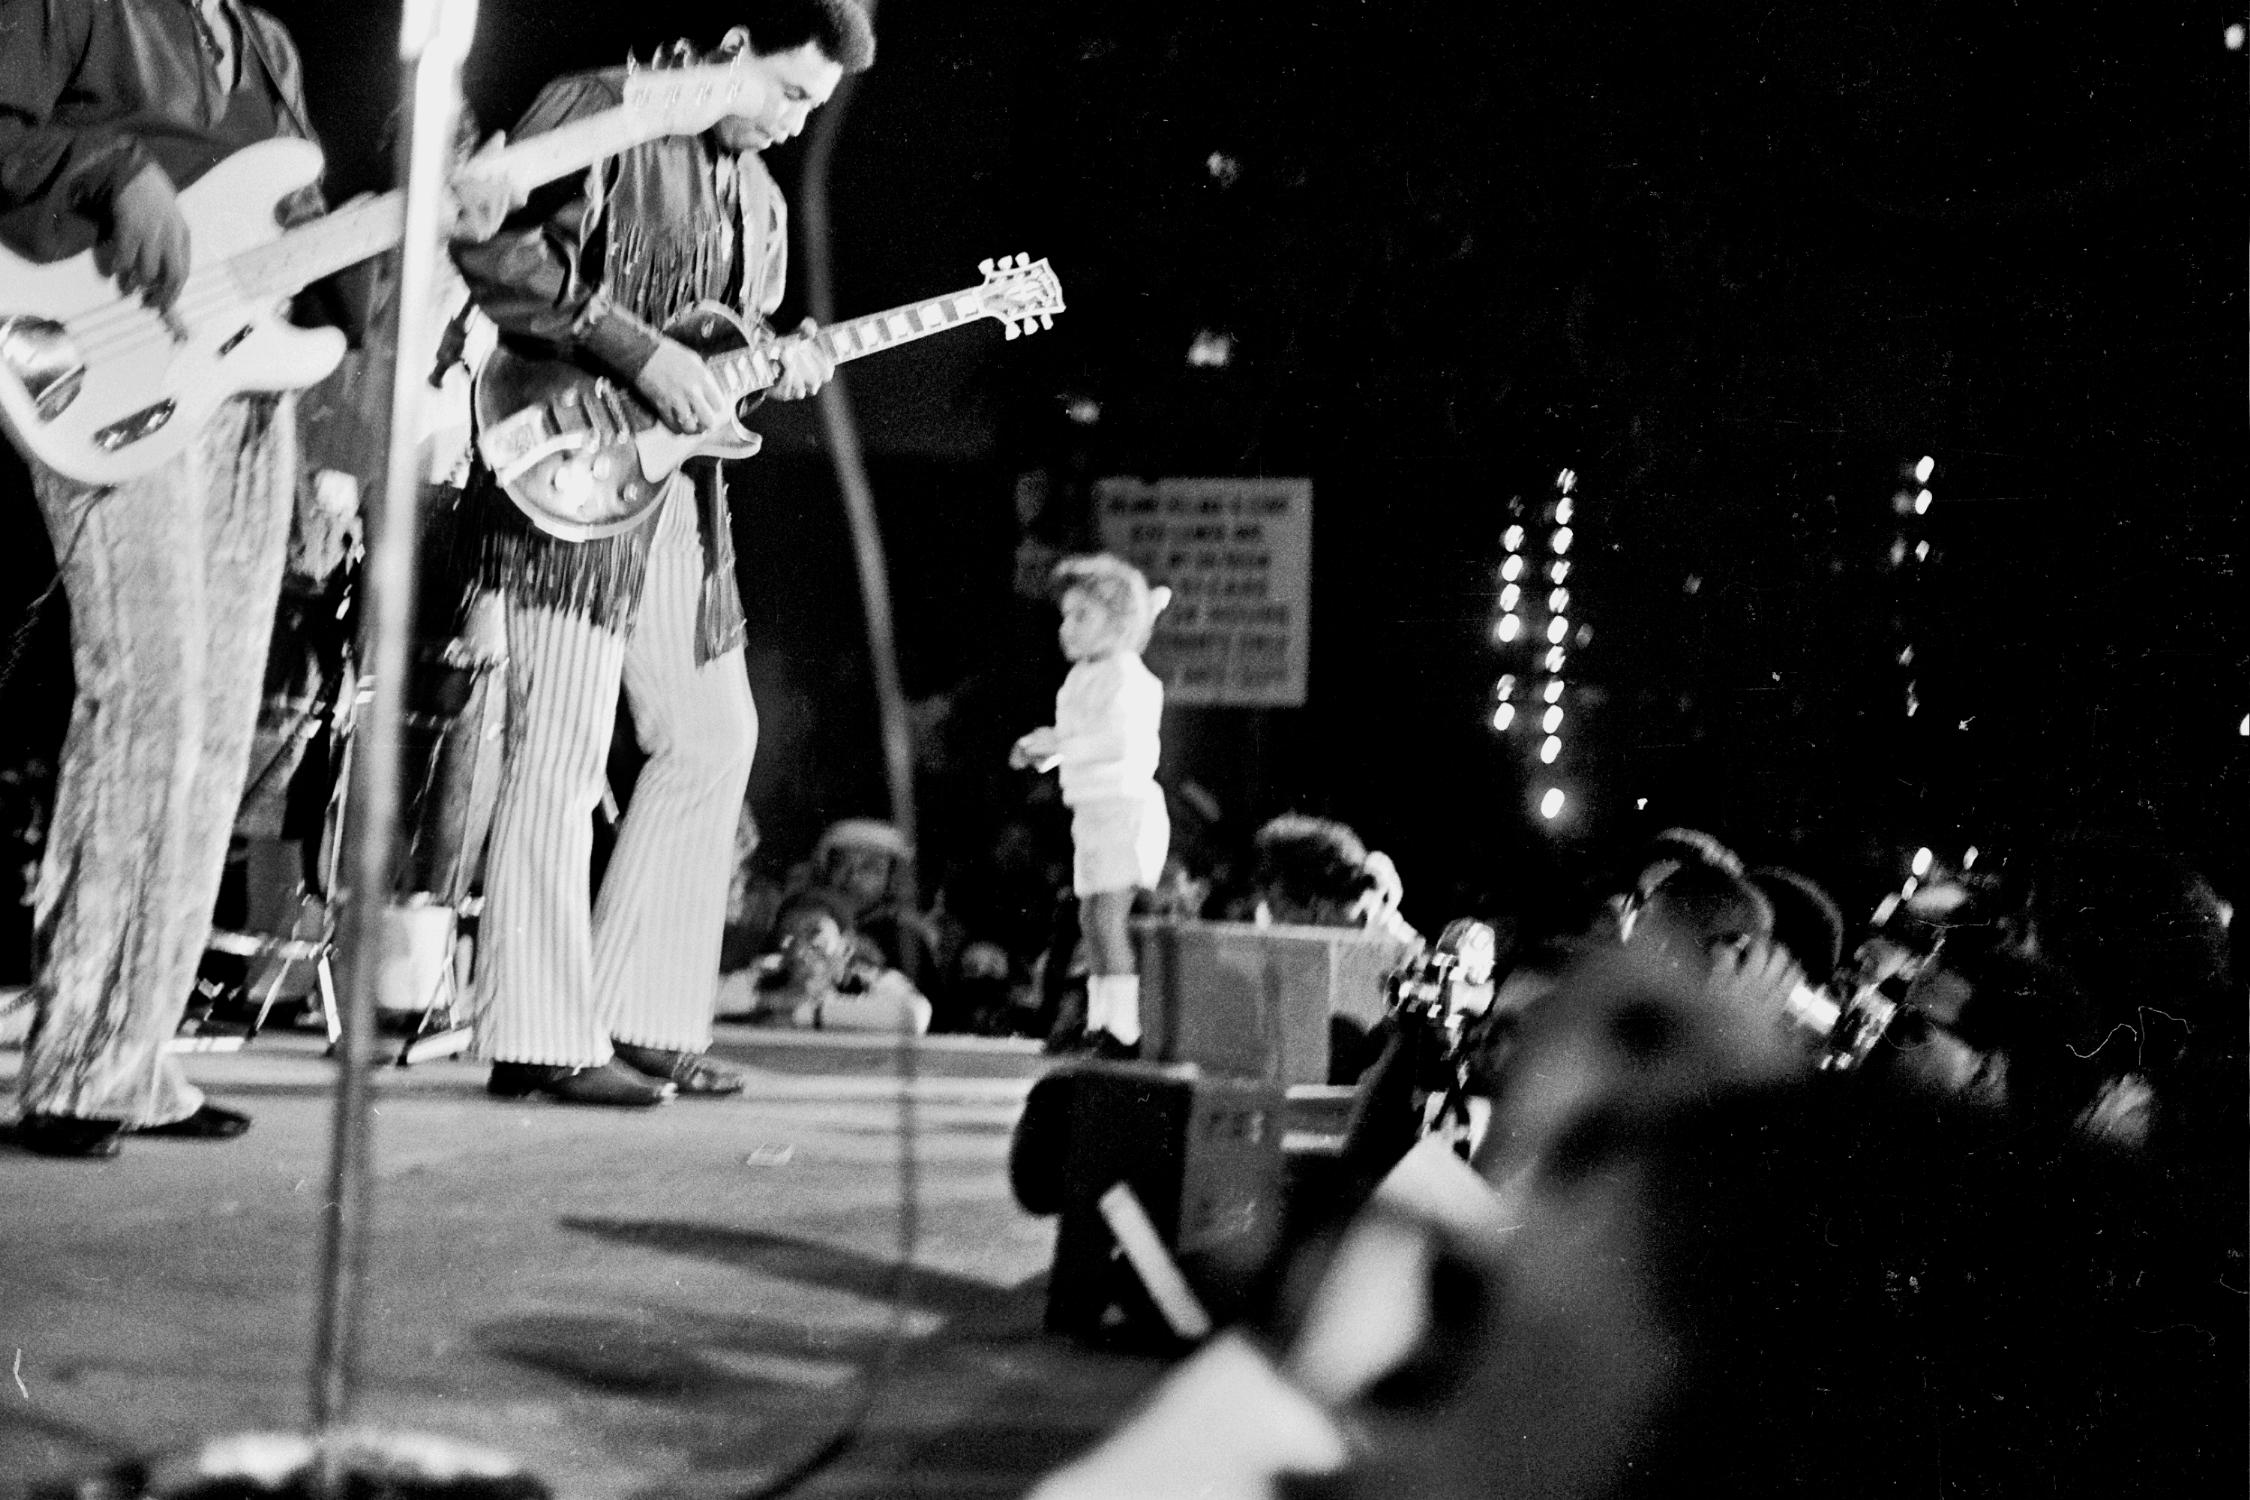 Grant Harper Reid Black and White Photograph - Child Running on Stage During Jimi Hendrix and the Experience Fine Art Print